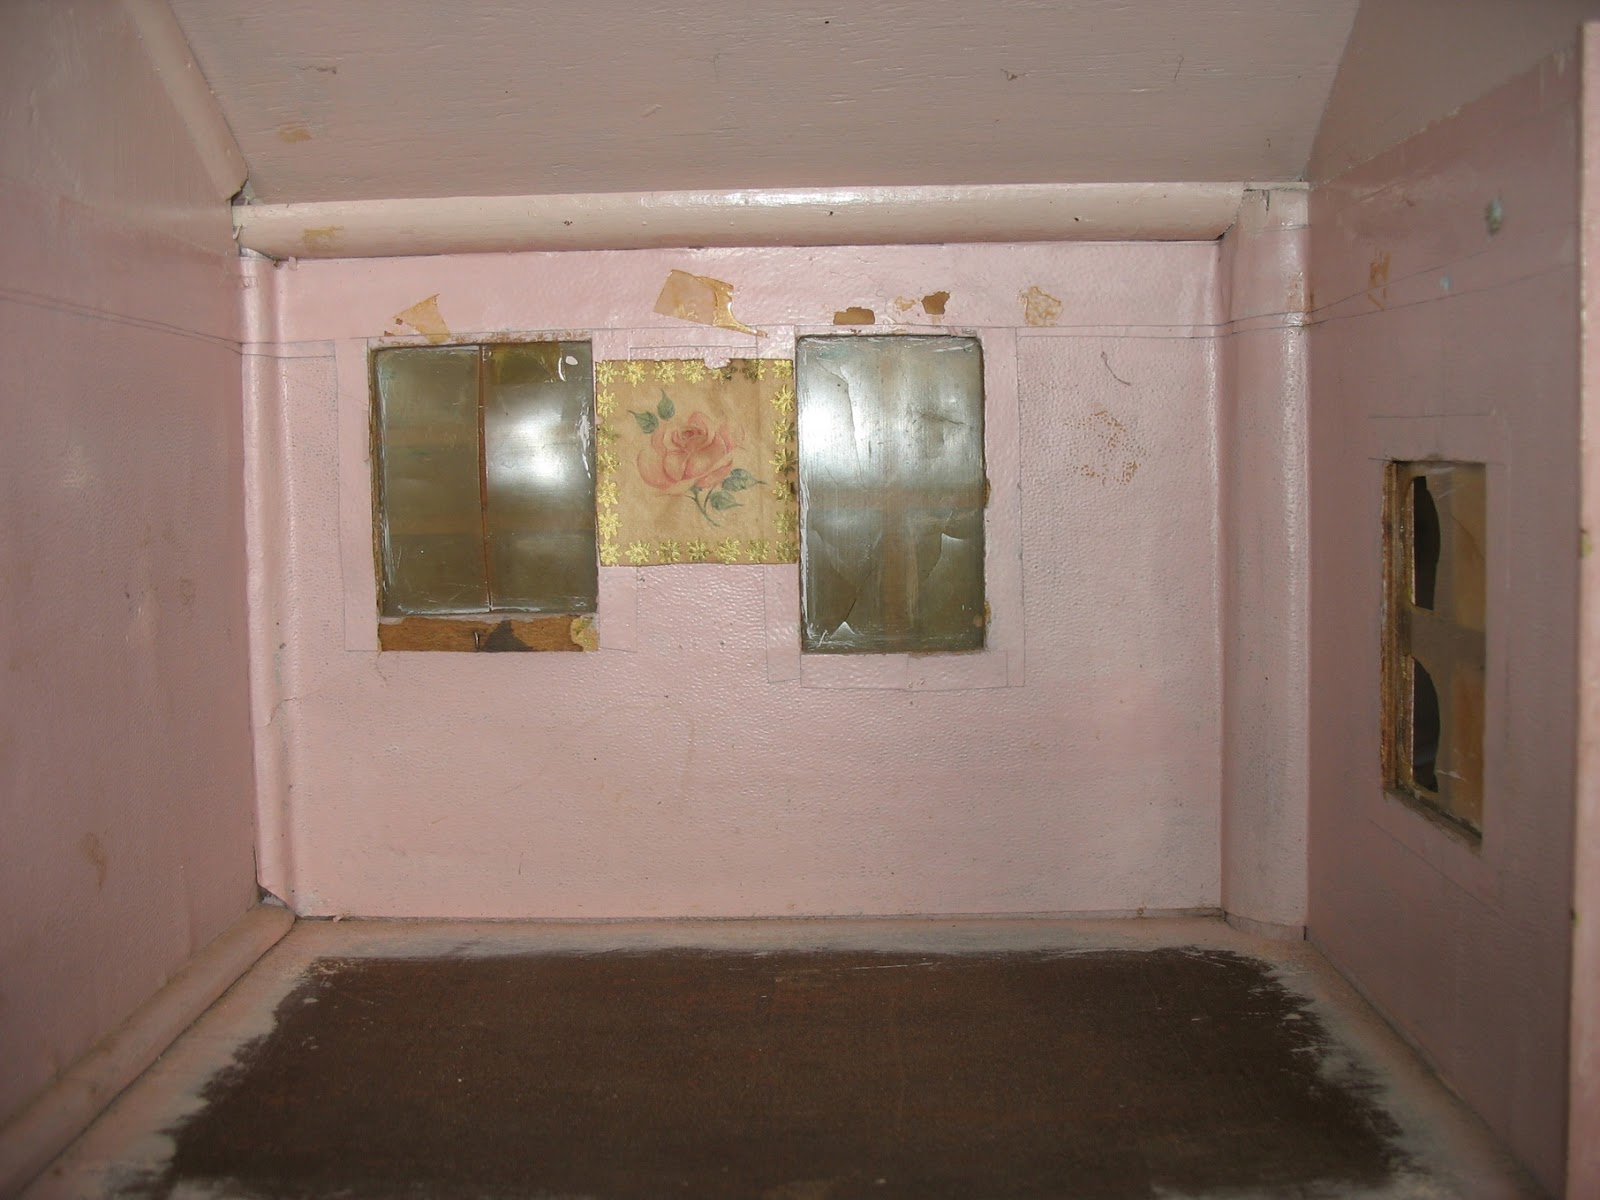 ... upstairs room have been painted pink, over the top of the wallpaper